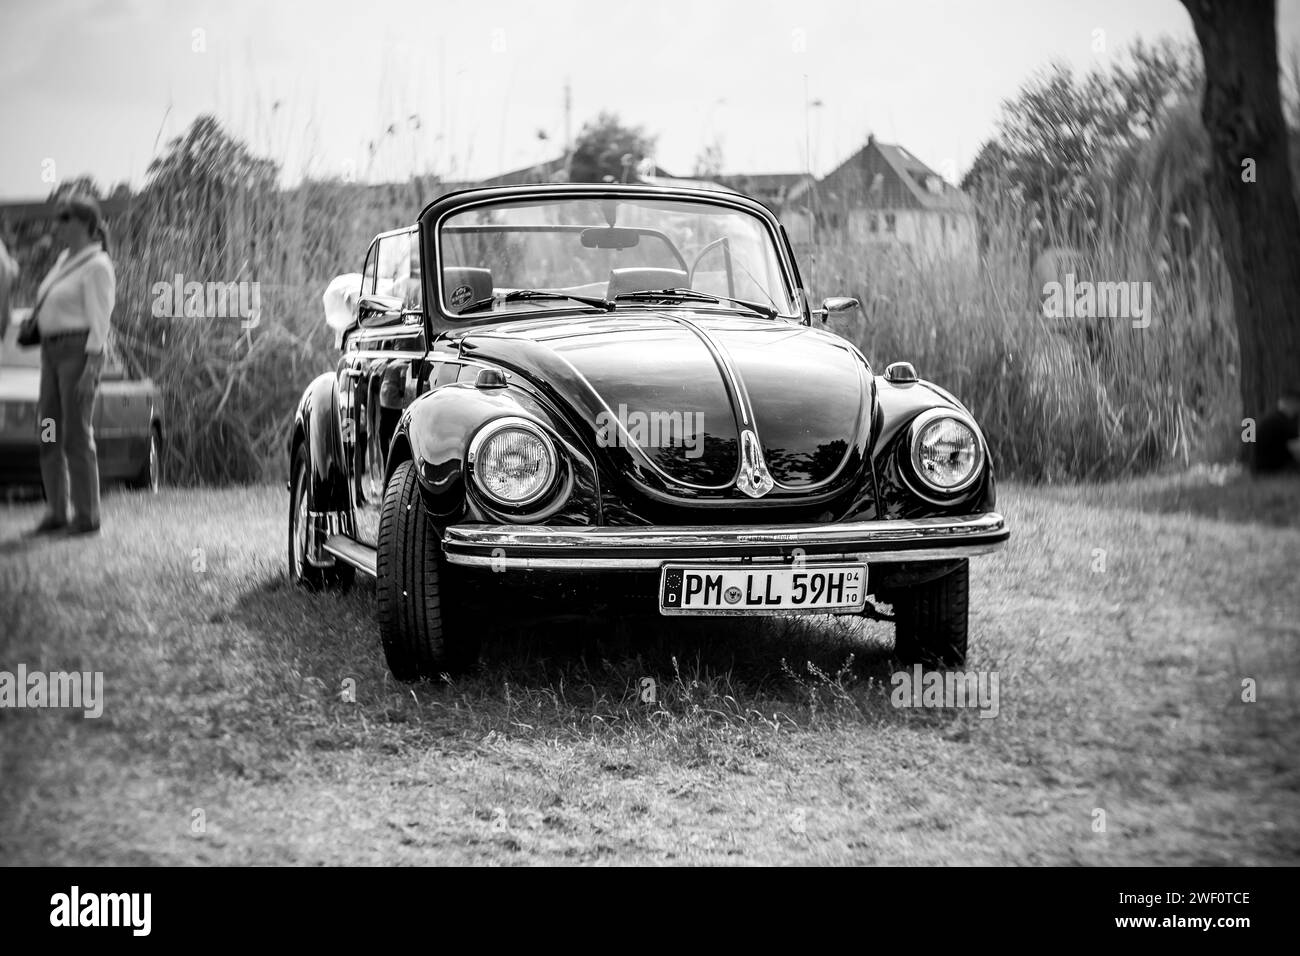 WERDER (HAVEL), GERMANY - MAY 20, 2023: The subcompact, economy car Volkswagen Beetle Convertible. Swirl bokeh, art lens. Black and white. Stock Photo